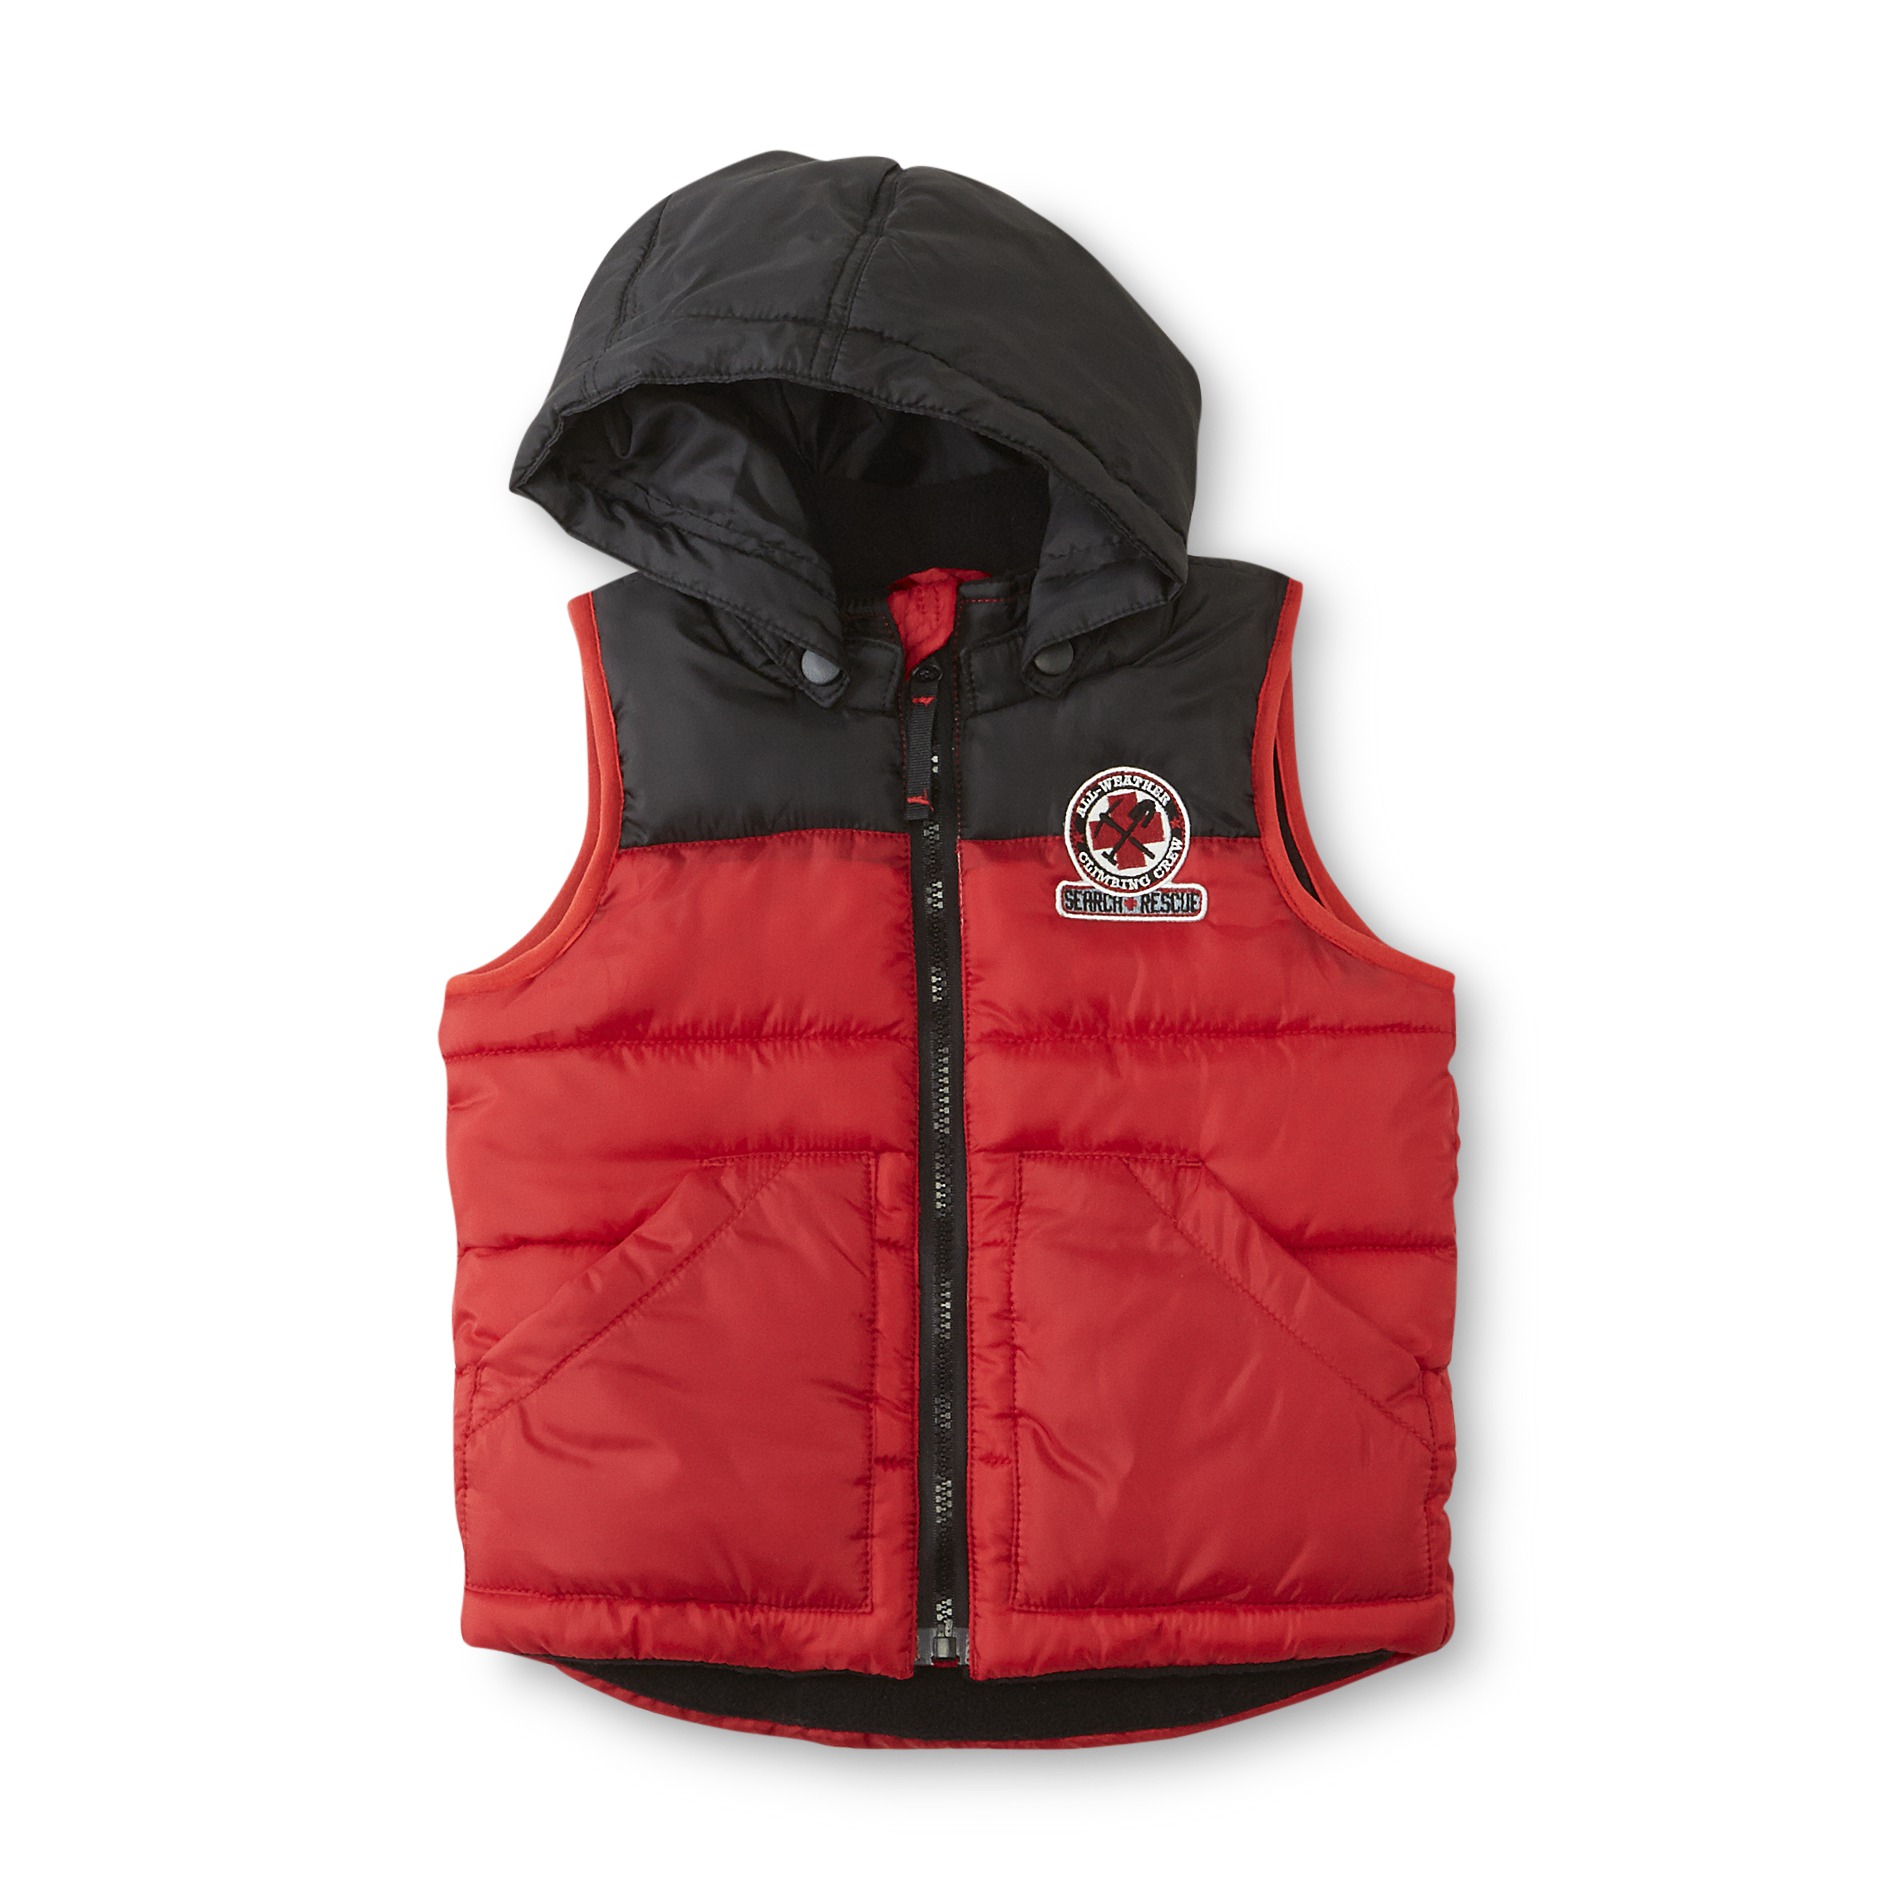 Toughskins Infant & Toddler Boy's Hooded Puffer Vest - Search & Rescue